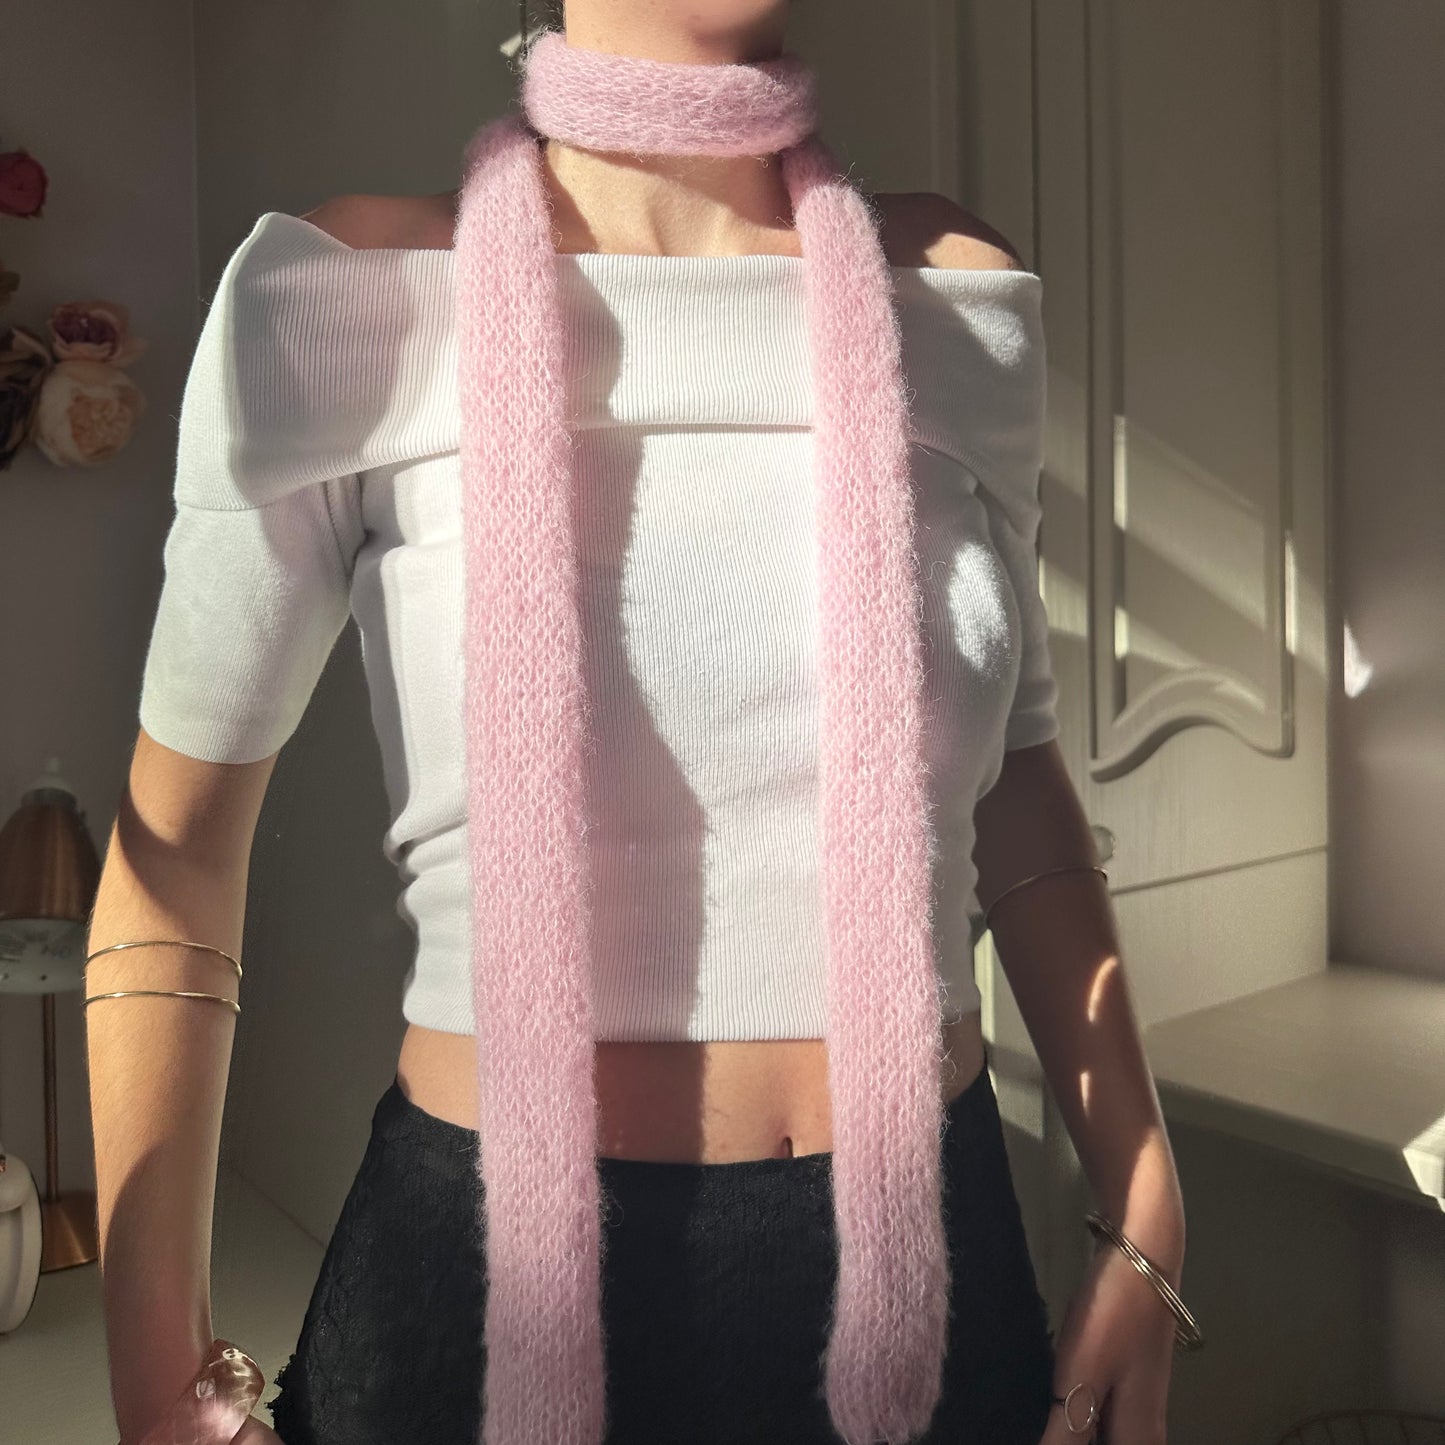 Handmade knitted mohair skinny scarf in baby pink